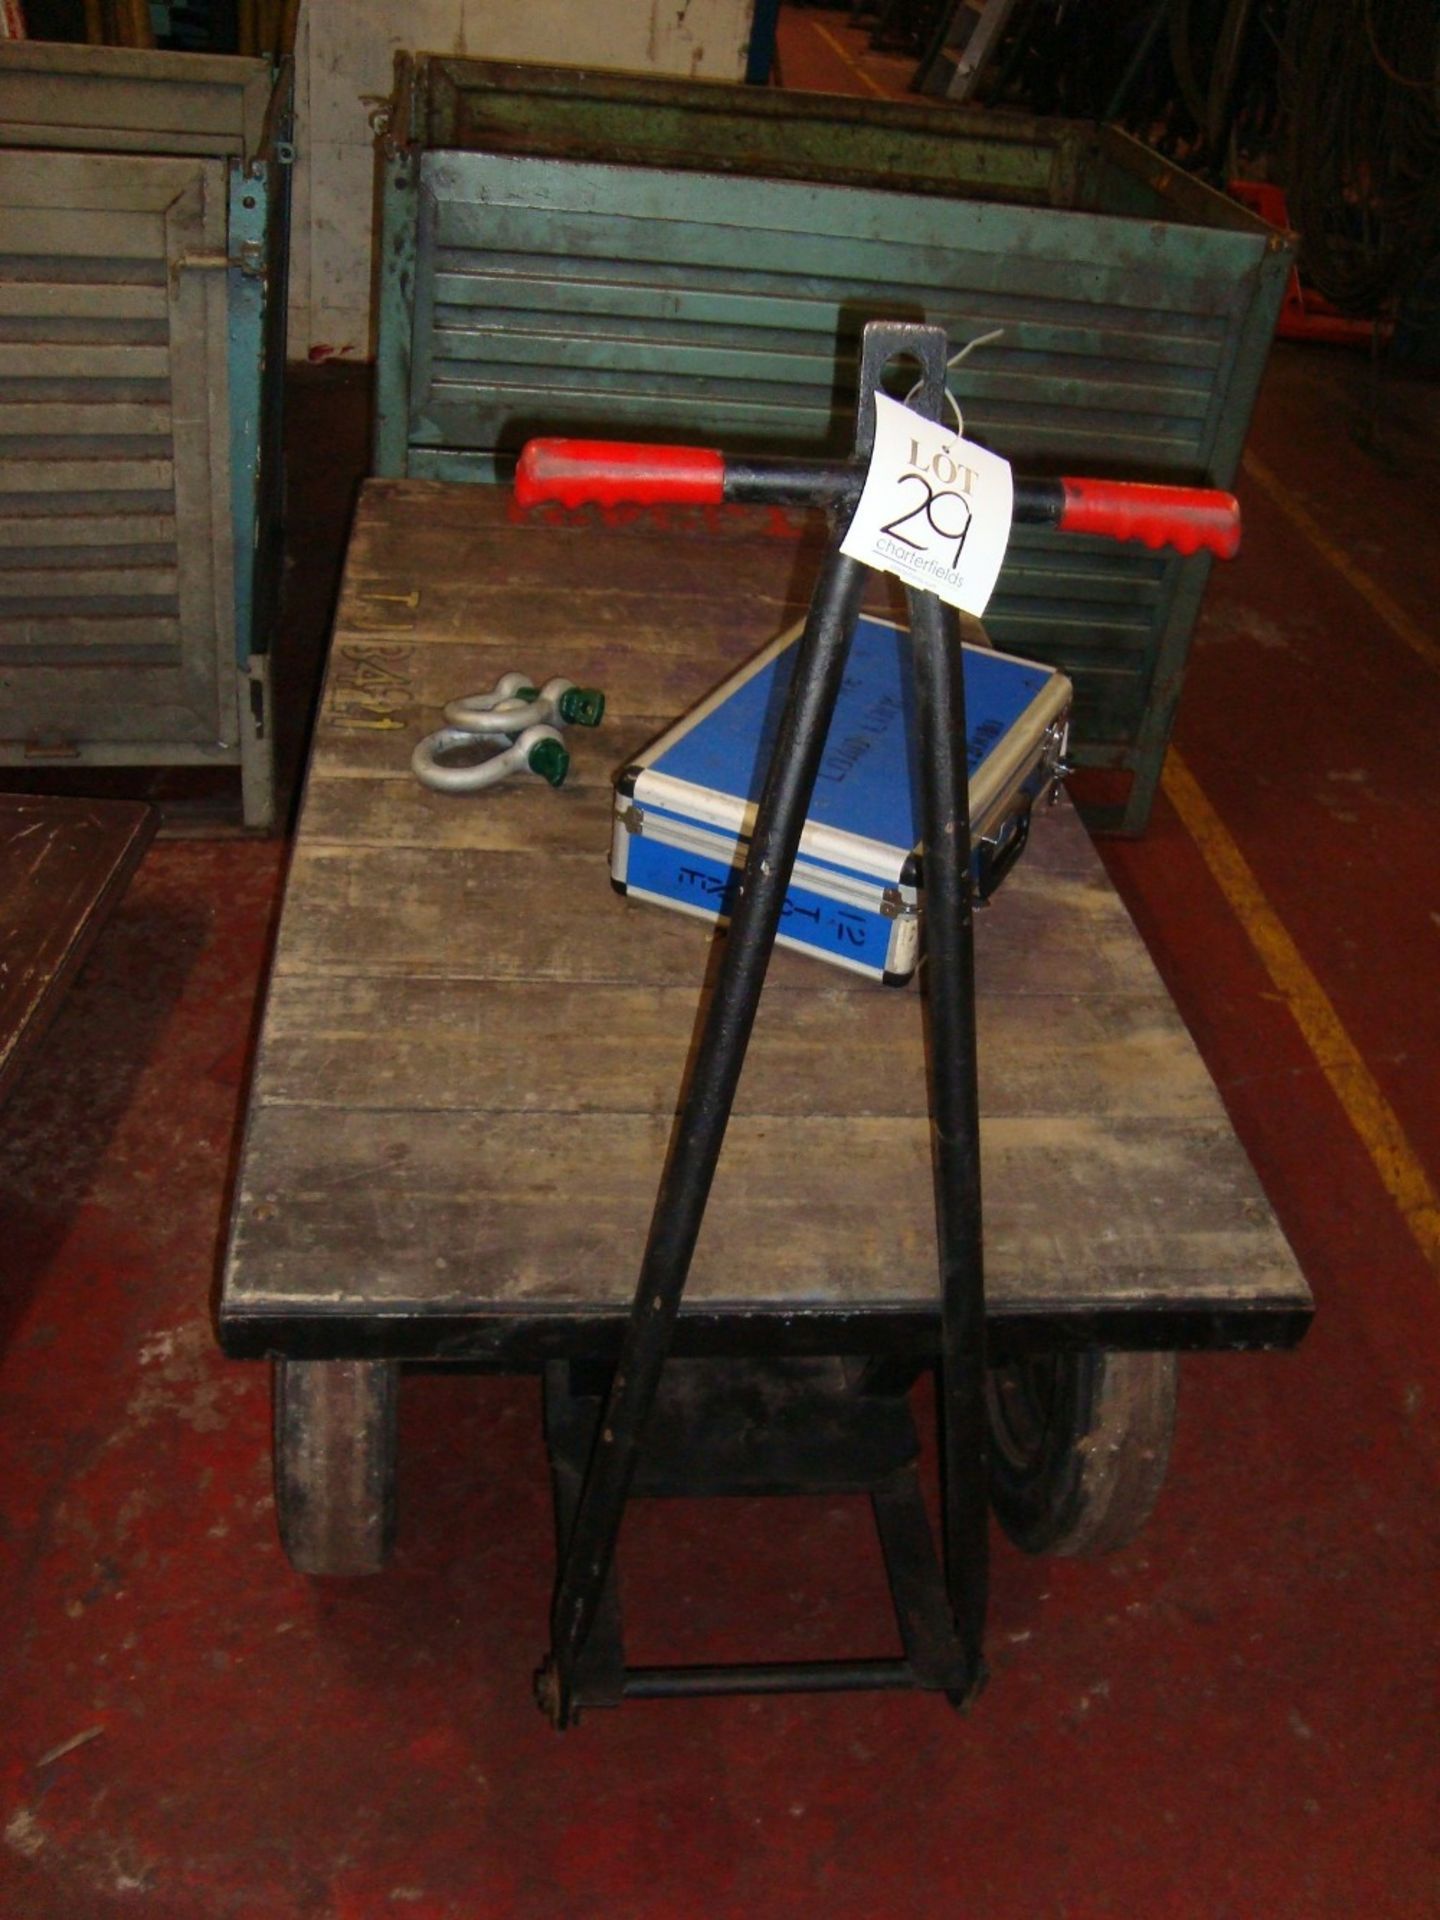 3 - Four wheel mobile 1 tonne works trolleys, as lotted